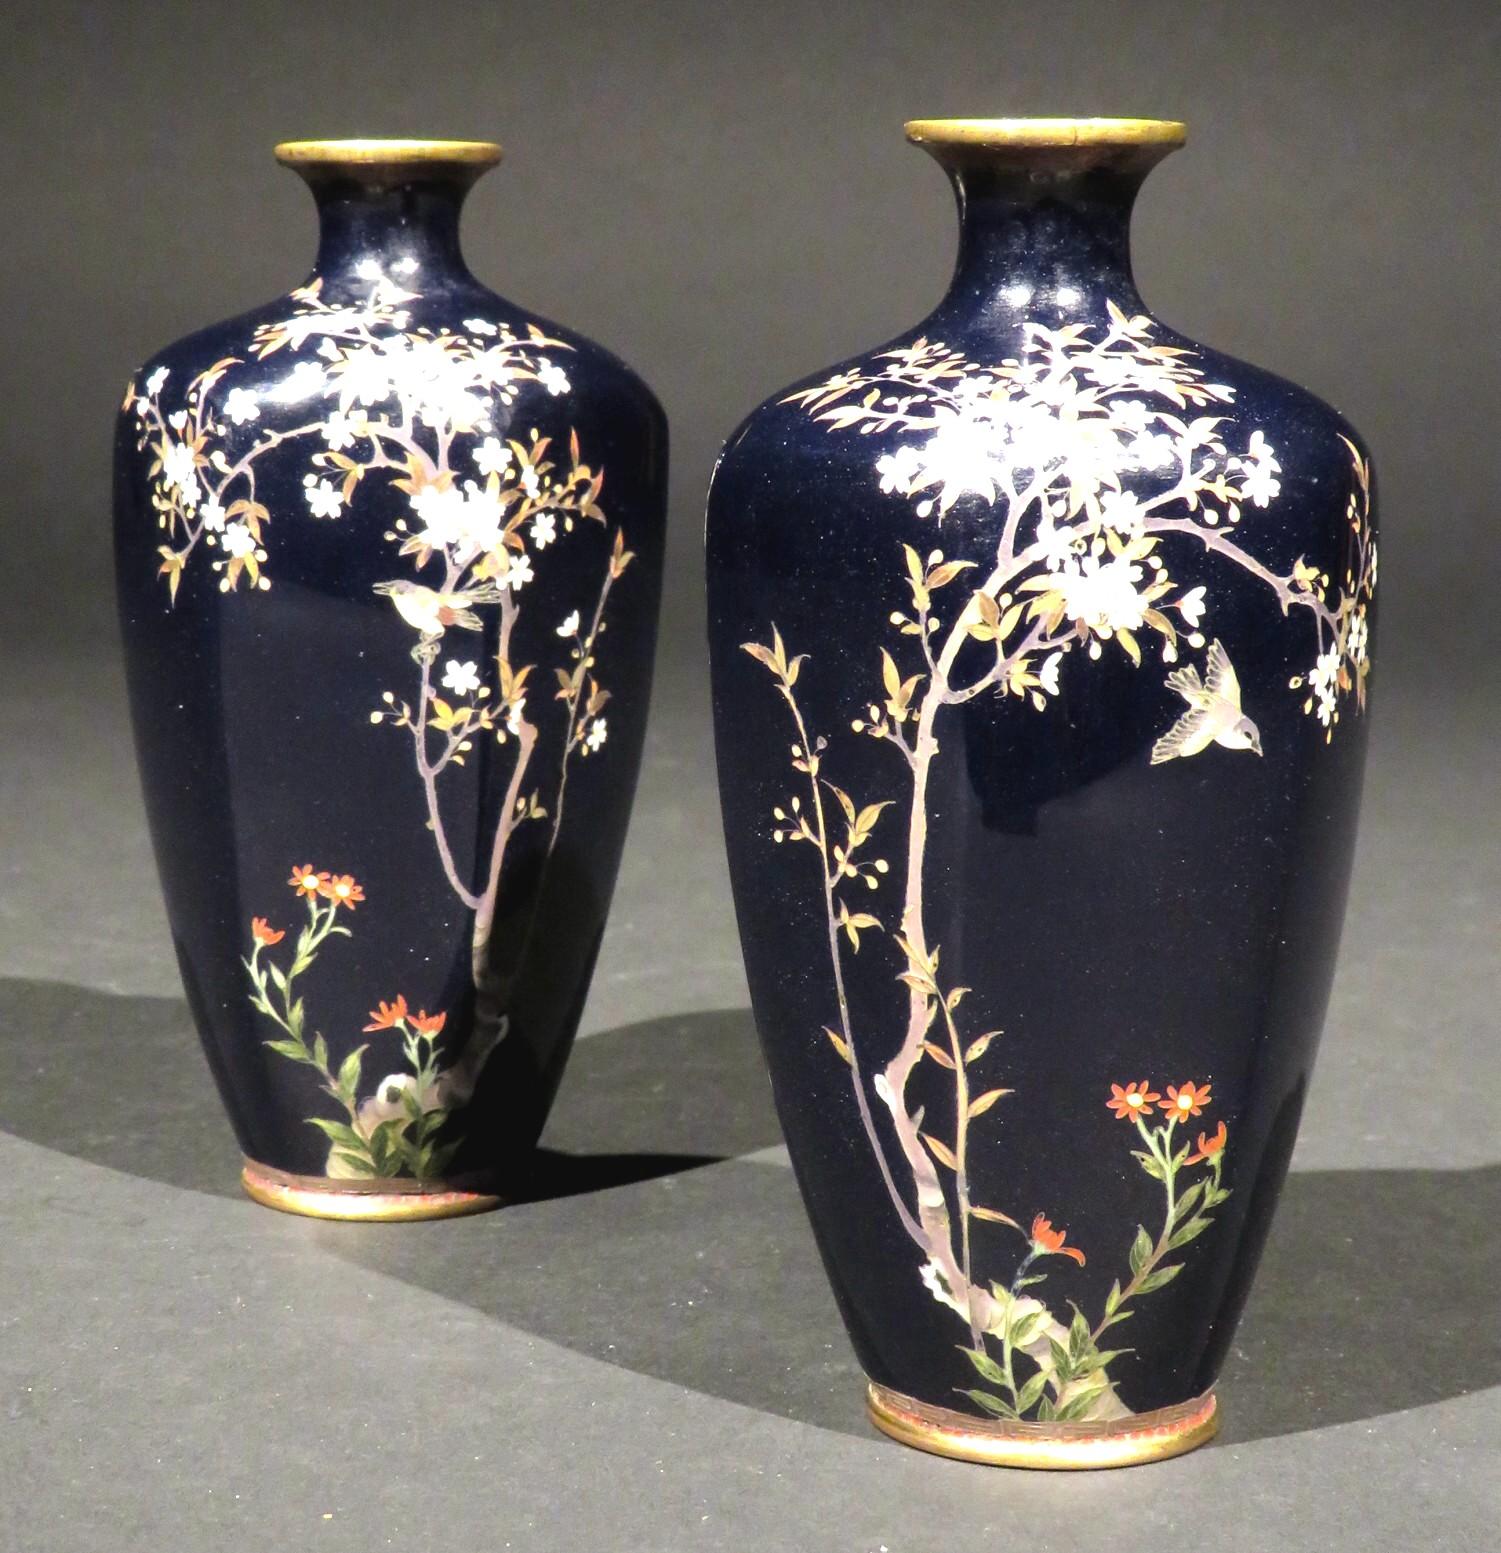 Both hexagonal panelled bodies exquisitely decorated by hand with multi-coloured enamels, illustrating directionally opposing vignettes of songbirds perched among flowering prunus against a deep indigo blue field.
The level of craftsmanship and